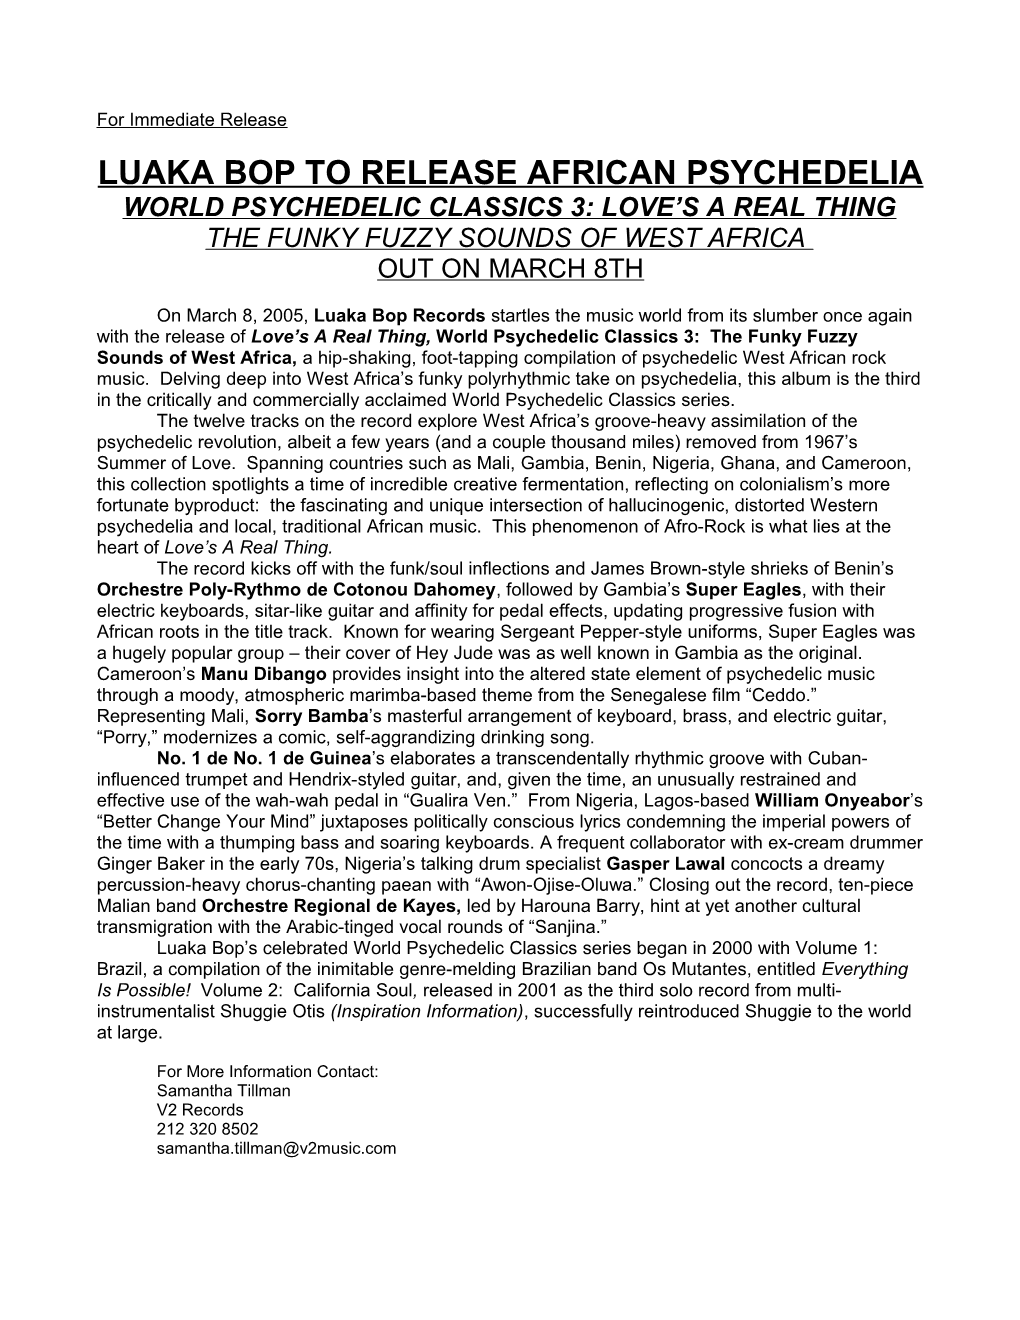 Luaka Bop to Release African Psychedelia